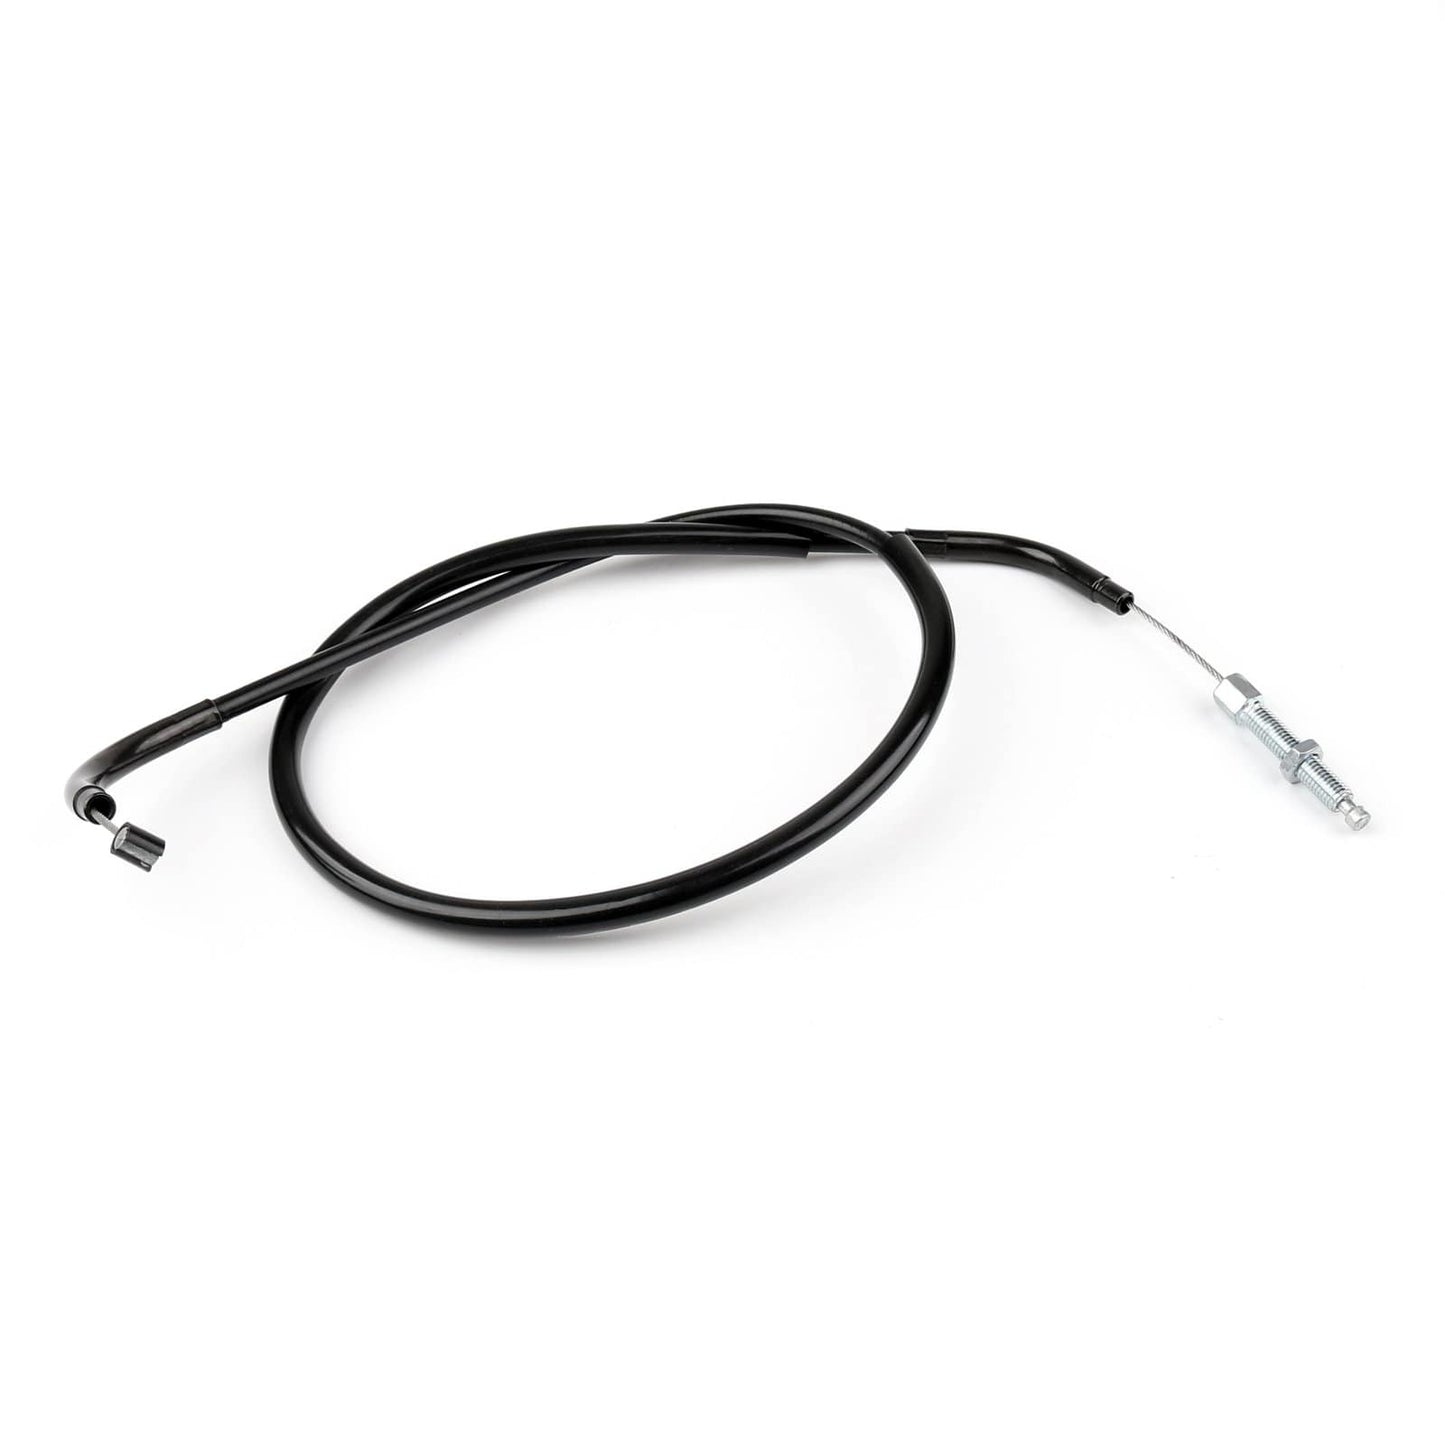 Wire Steel Clutch Cable Replacement For Suzuki TL1000S 1997-2002 1998 2000